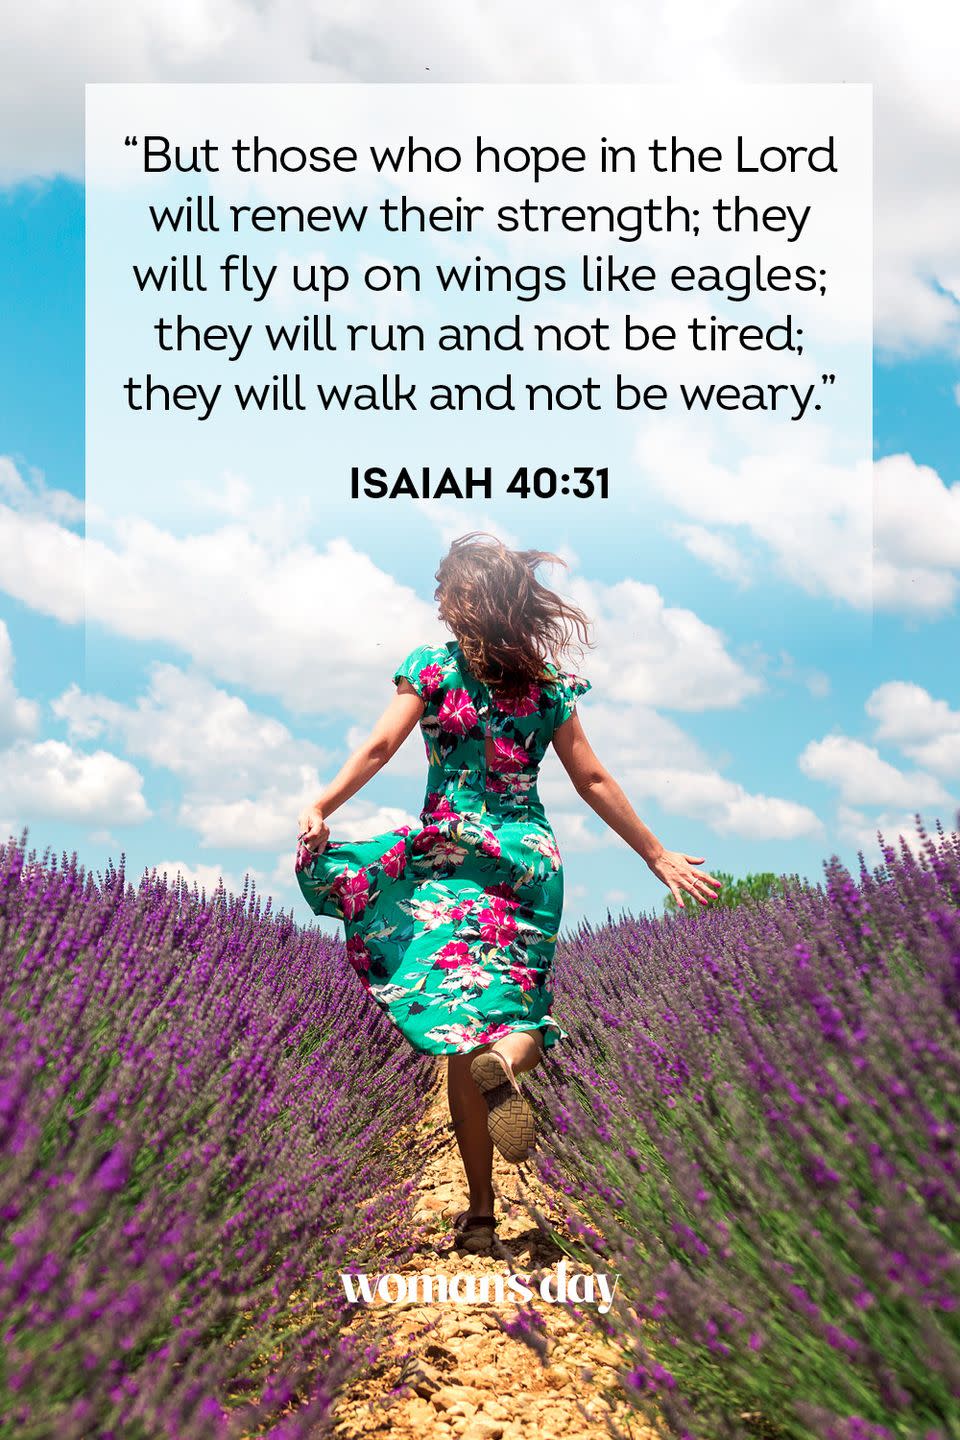 <p>“But those who hope in the Lord will renew their strength; they will fly up on wings like eagles; they will run and not be tired; they will walk and not be weary.” </p>